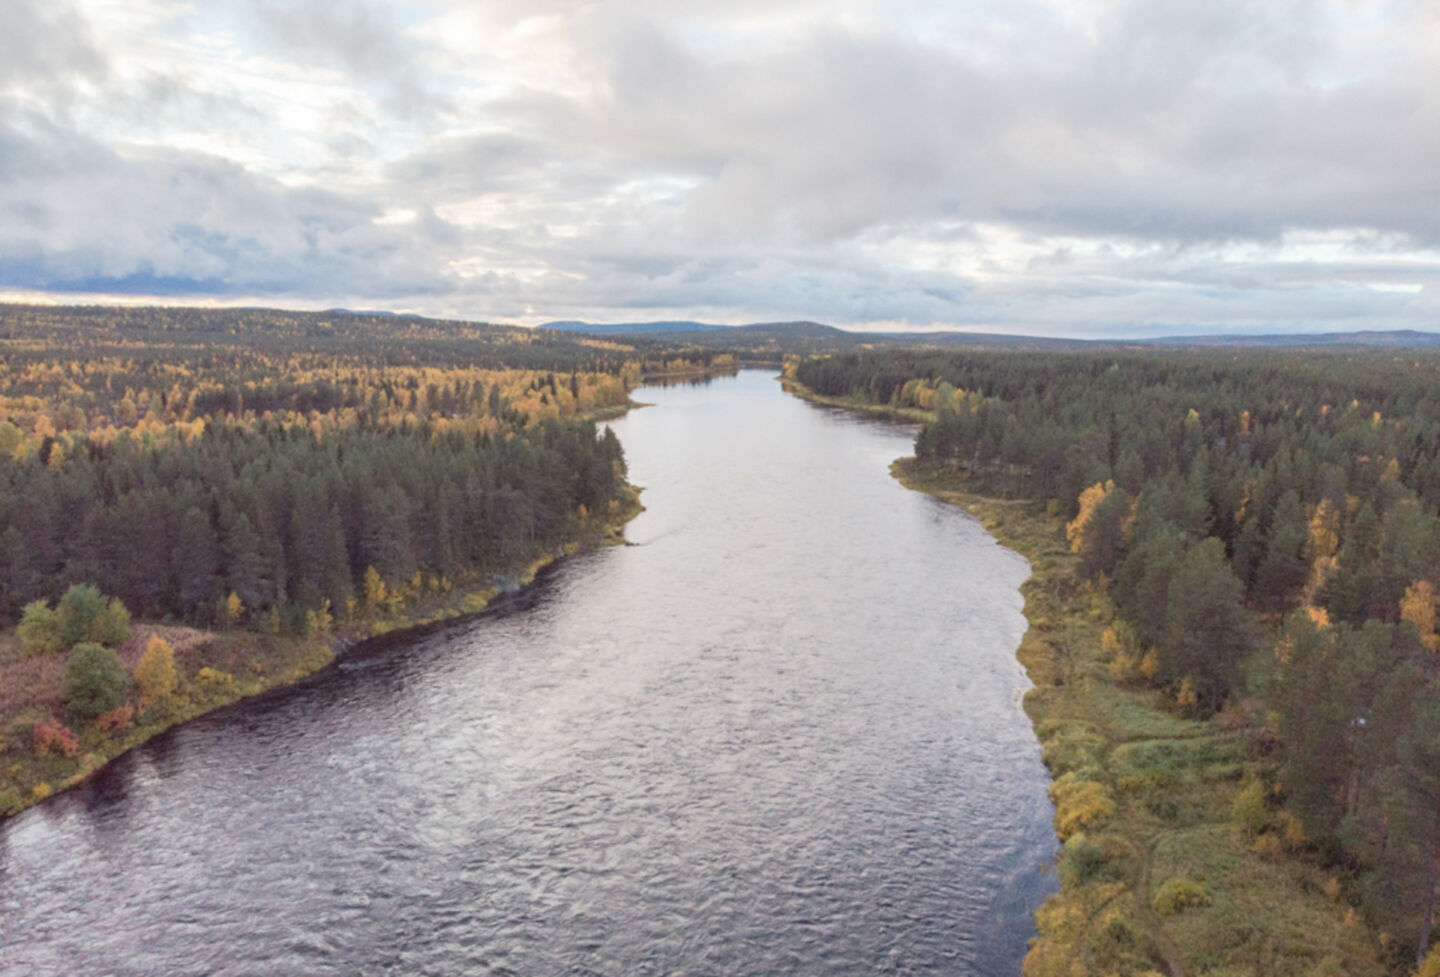 A summer river, a wilderness film location in Finnish Lapland